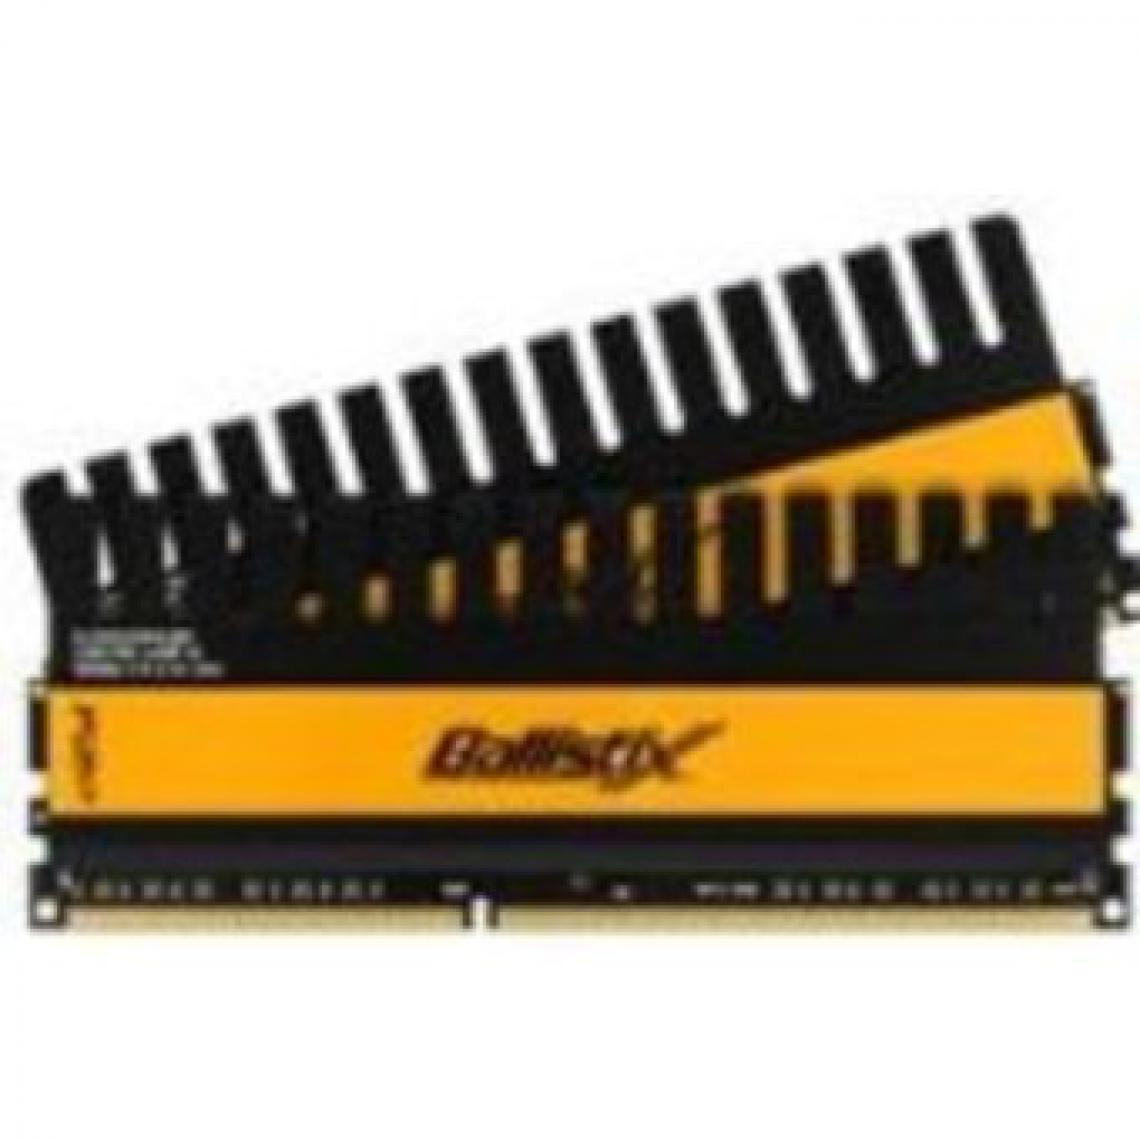 Crucial - DDR3L 4 Go (2 x 2 Go) 1600 MHz CL11 - RAM PC Fixe